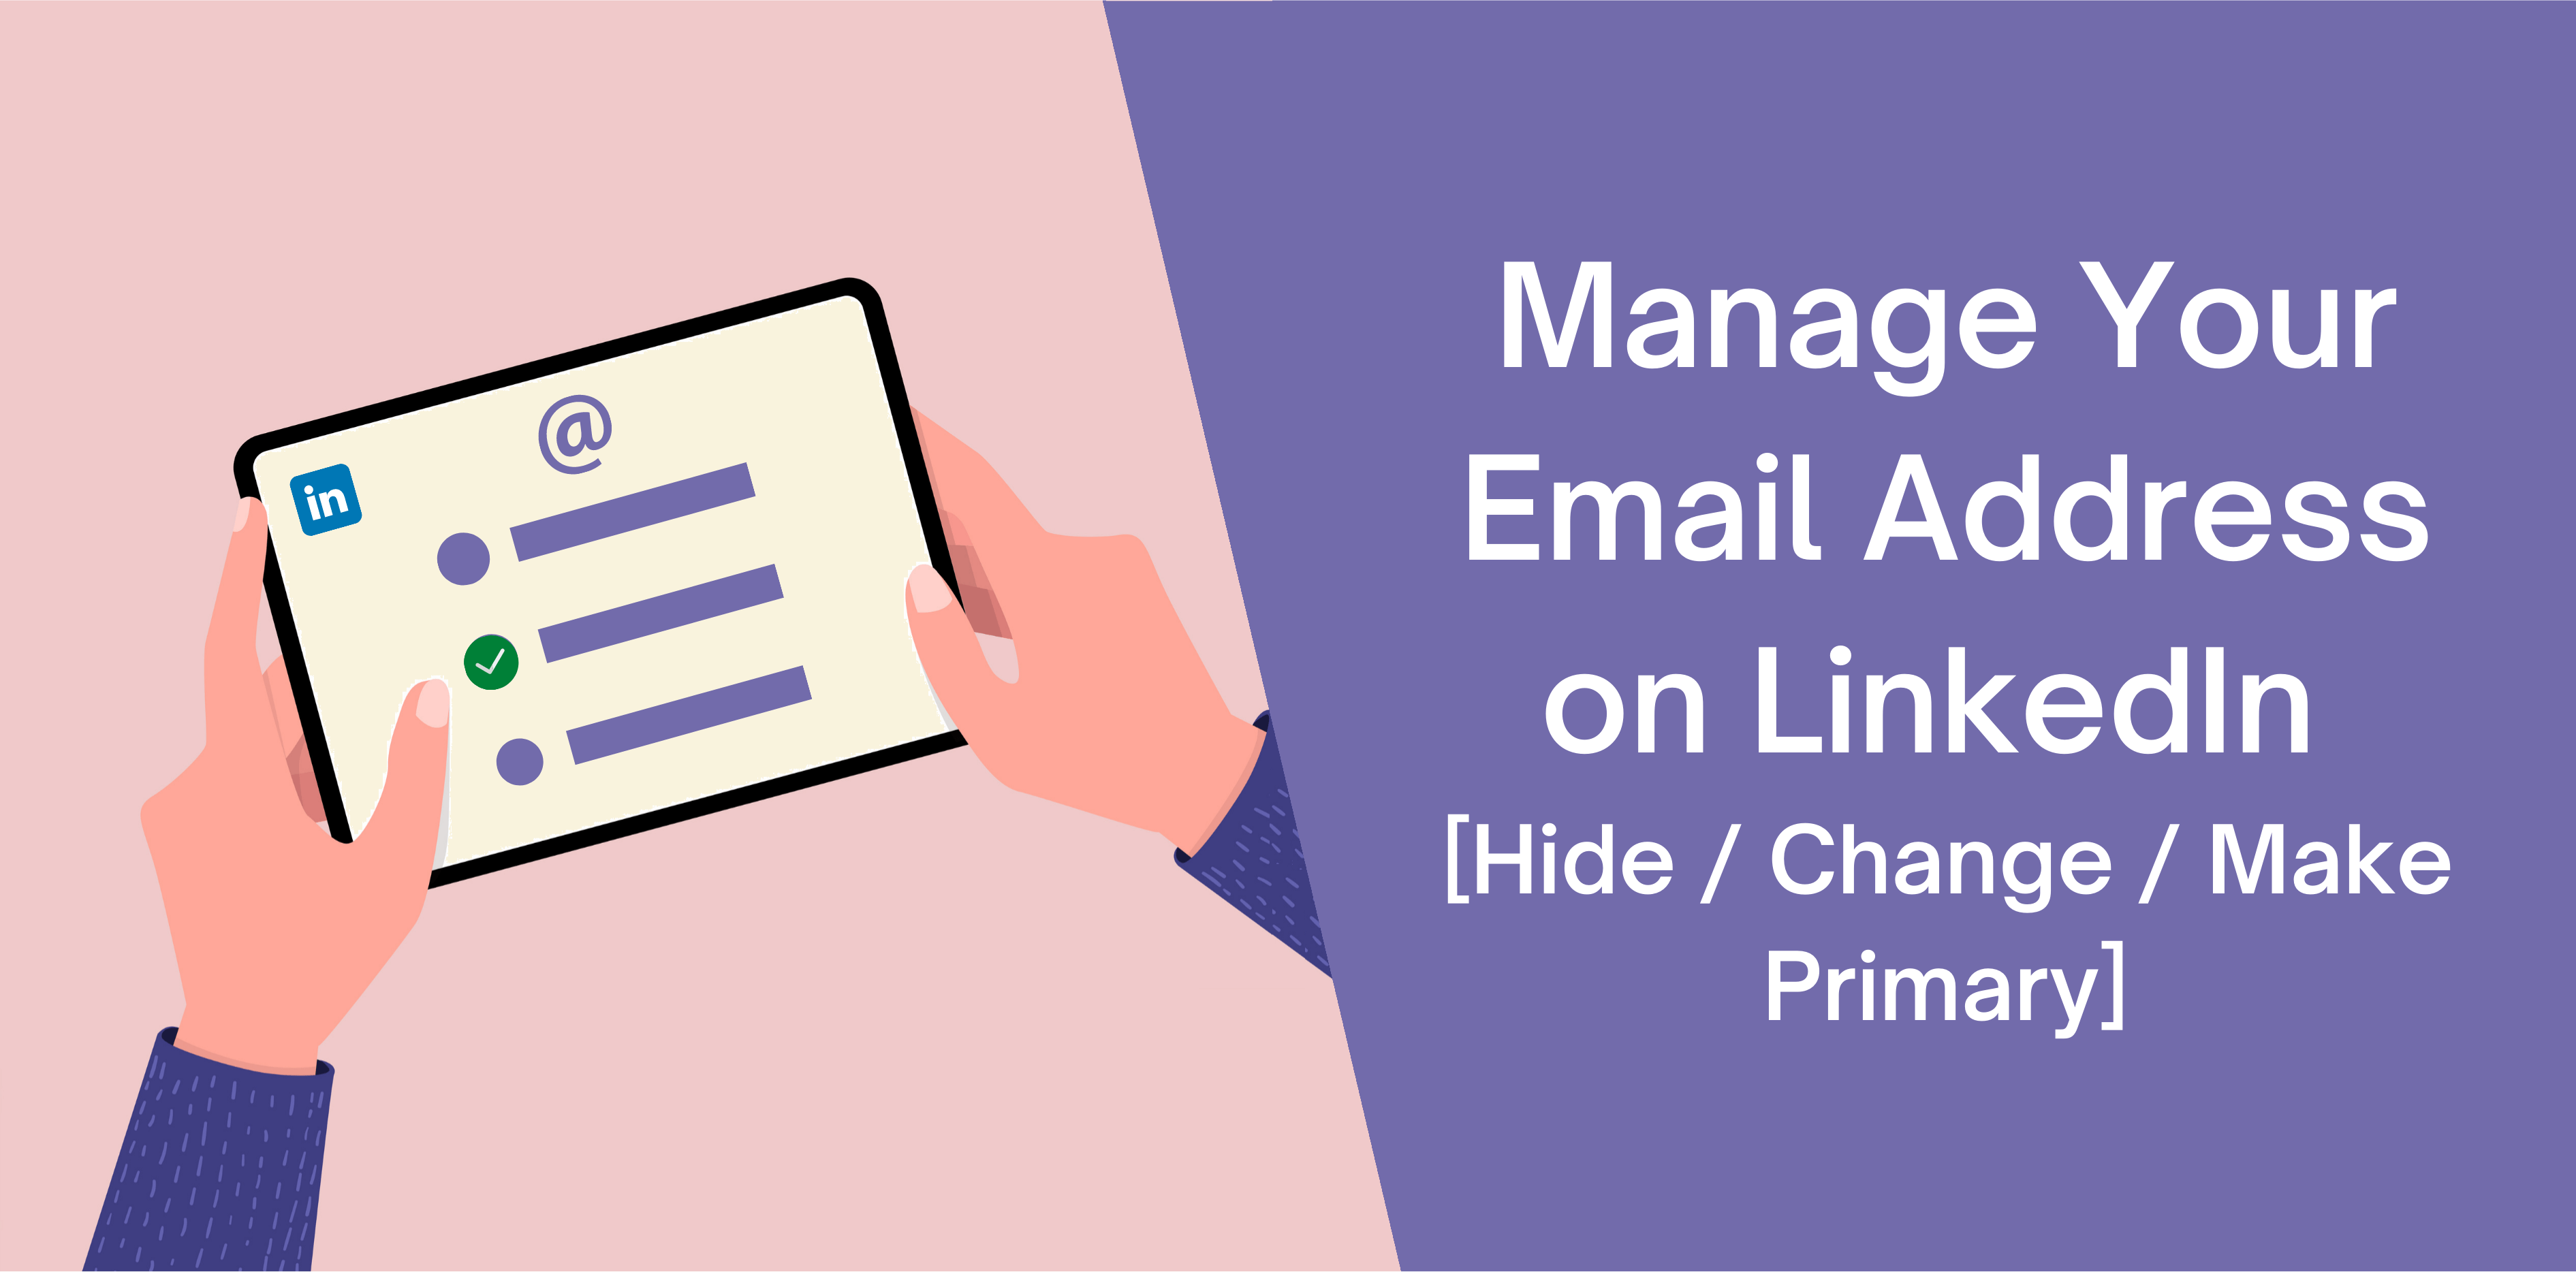 Thumbnail-Manage-Your Email-Address-on-LinkedIn